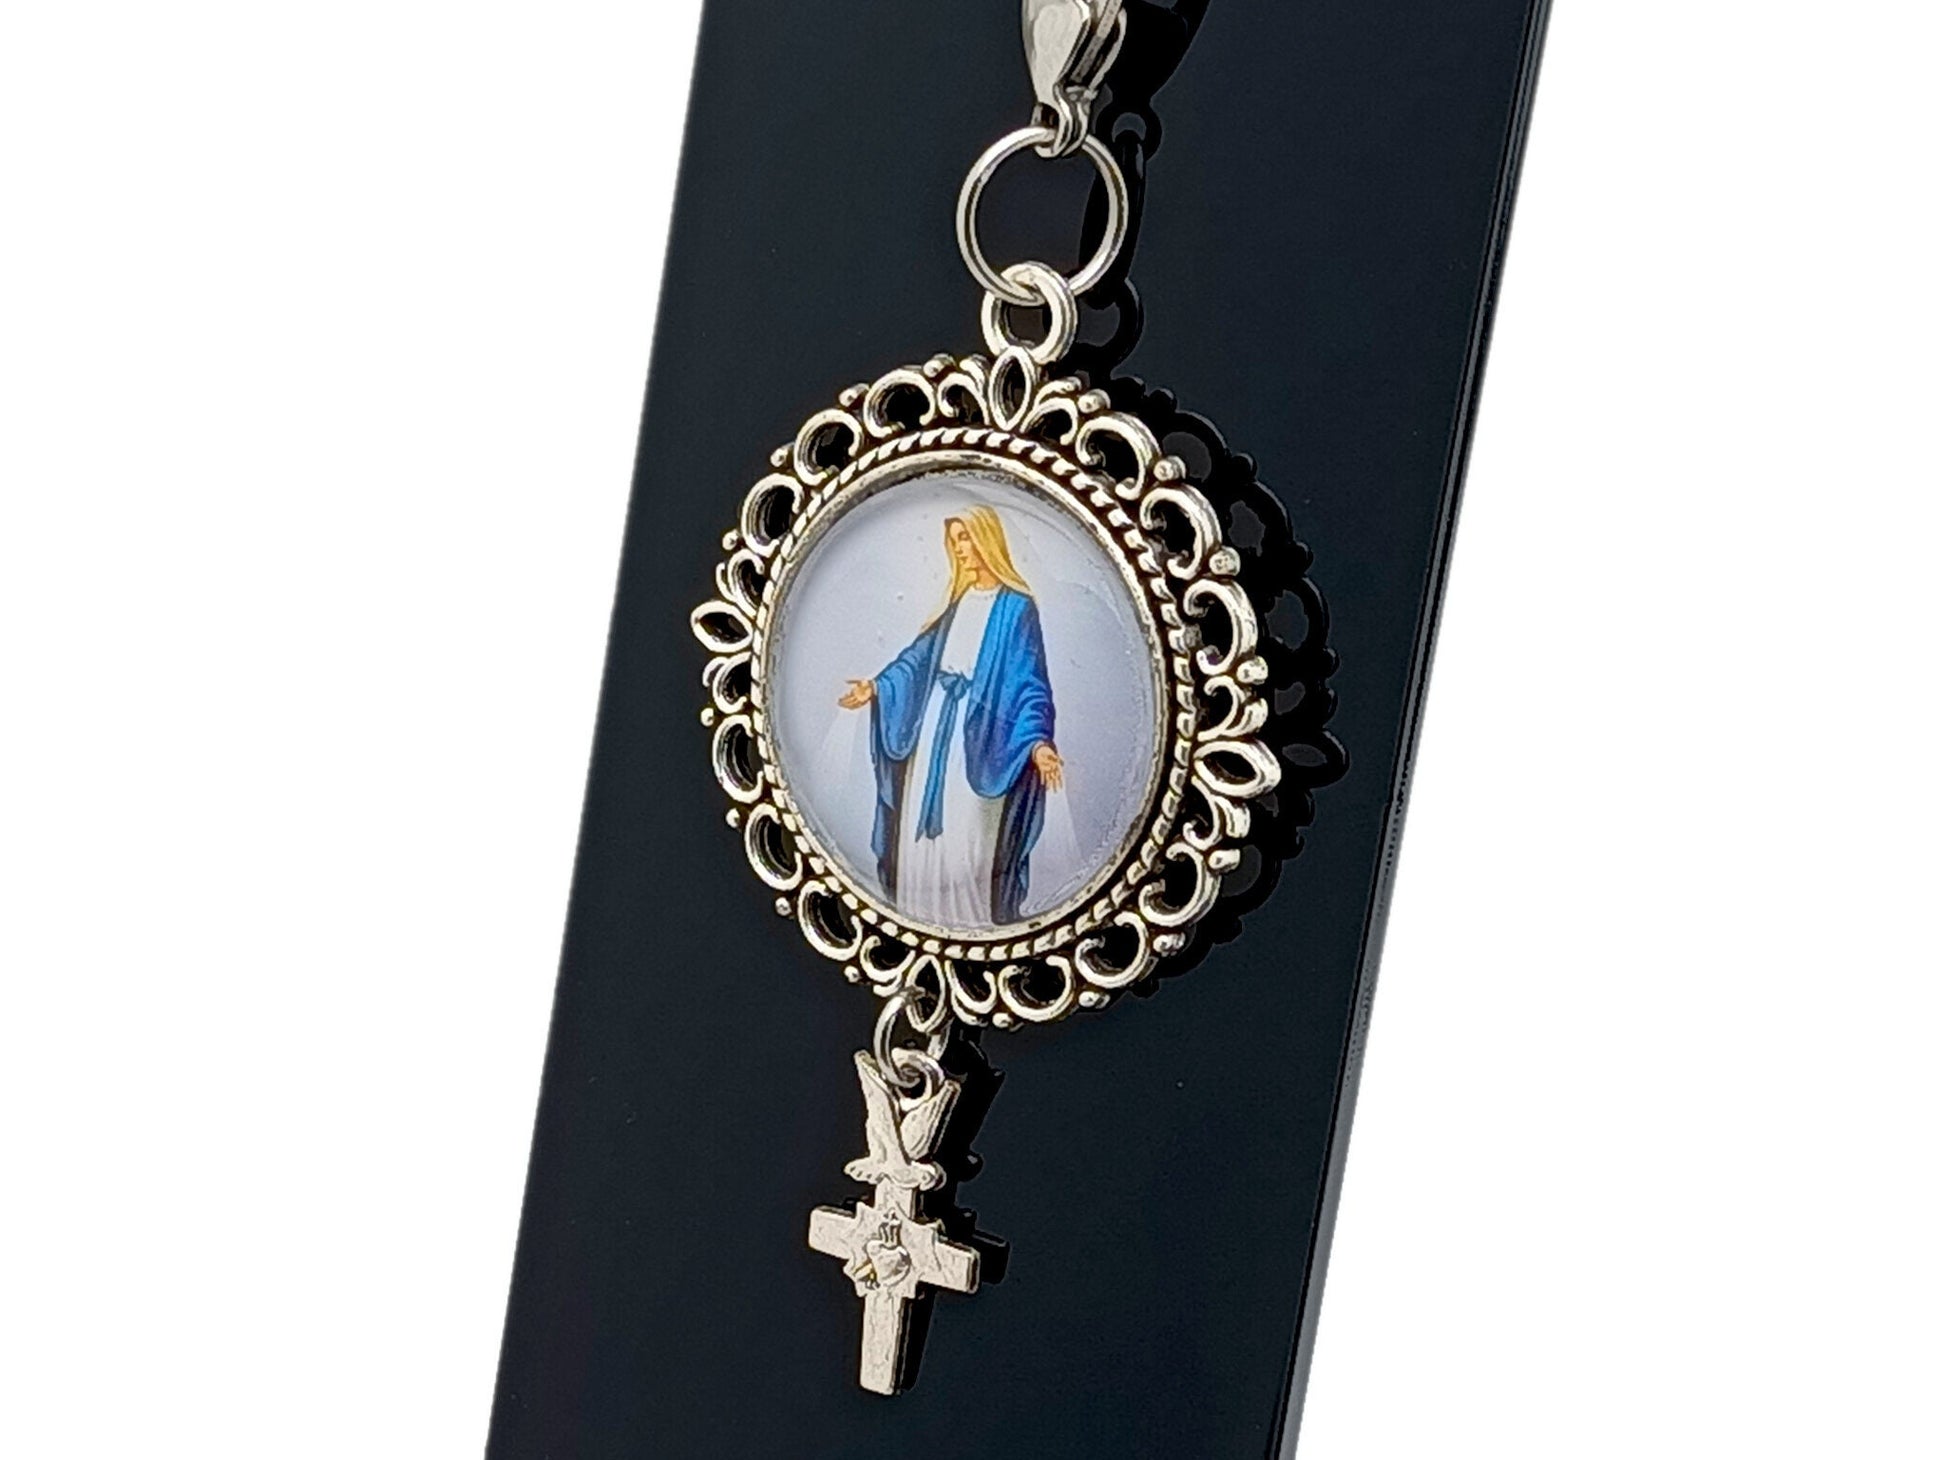 Our Lady of Grace domed picture medal unique rosary beads purse clip key chain with Holy Spirit and Sacred Heart cross.